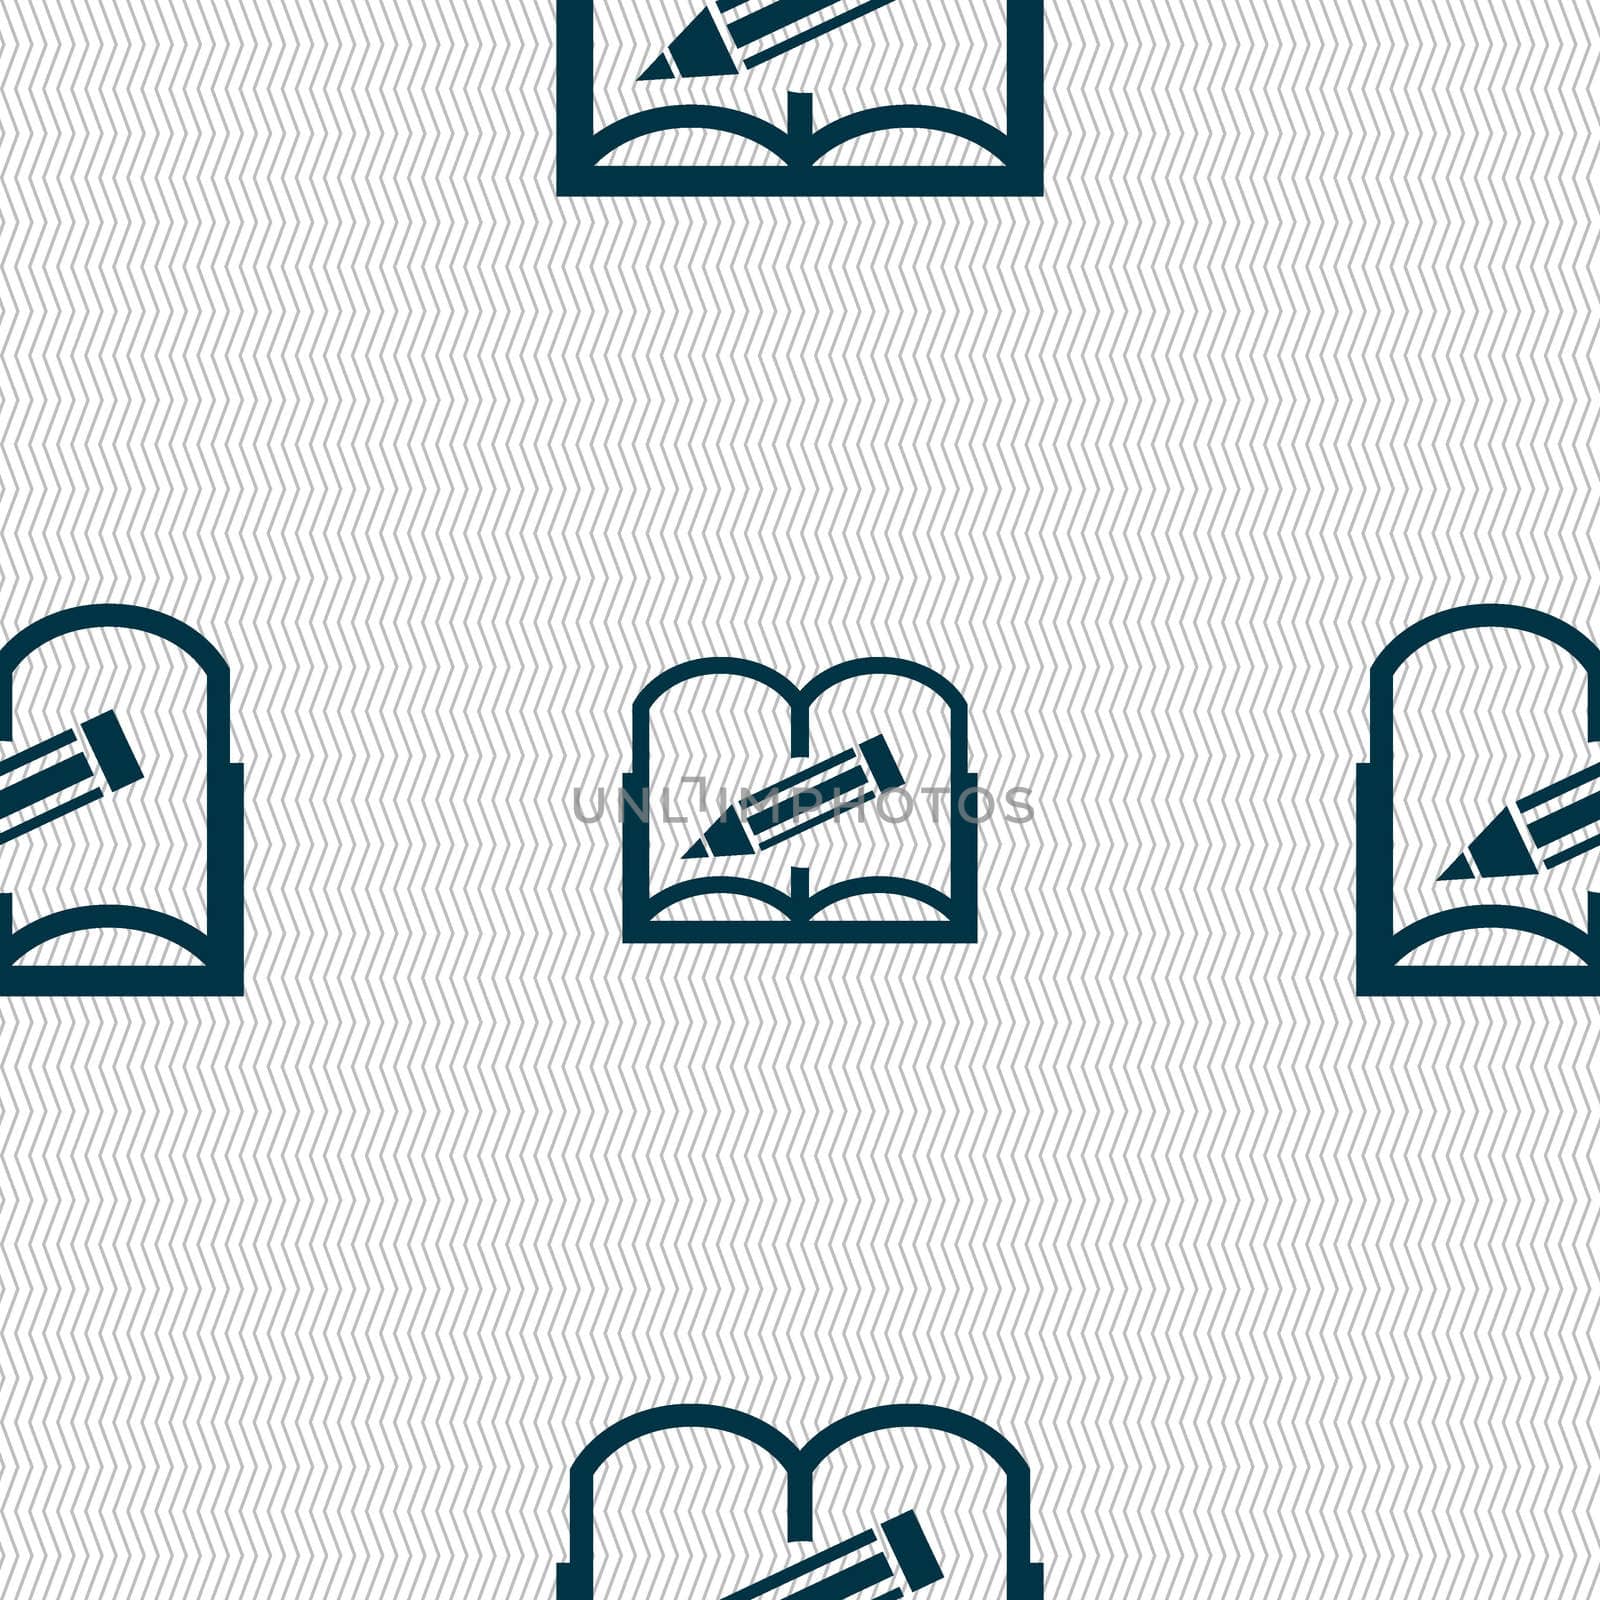 Book sign icon. Open book symbol. Seamless abstract background with geometric shapes.  by serhii_lohvyniuk